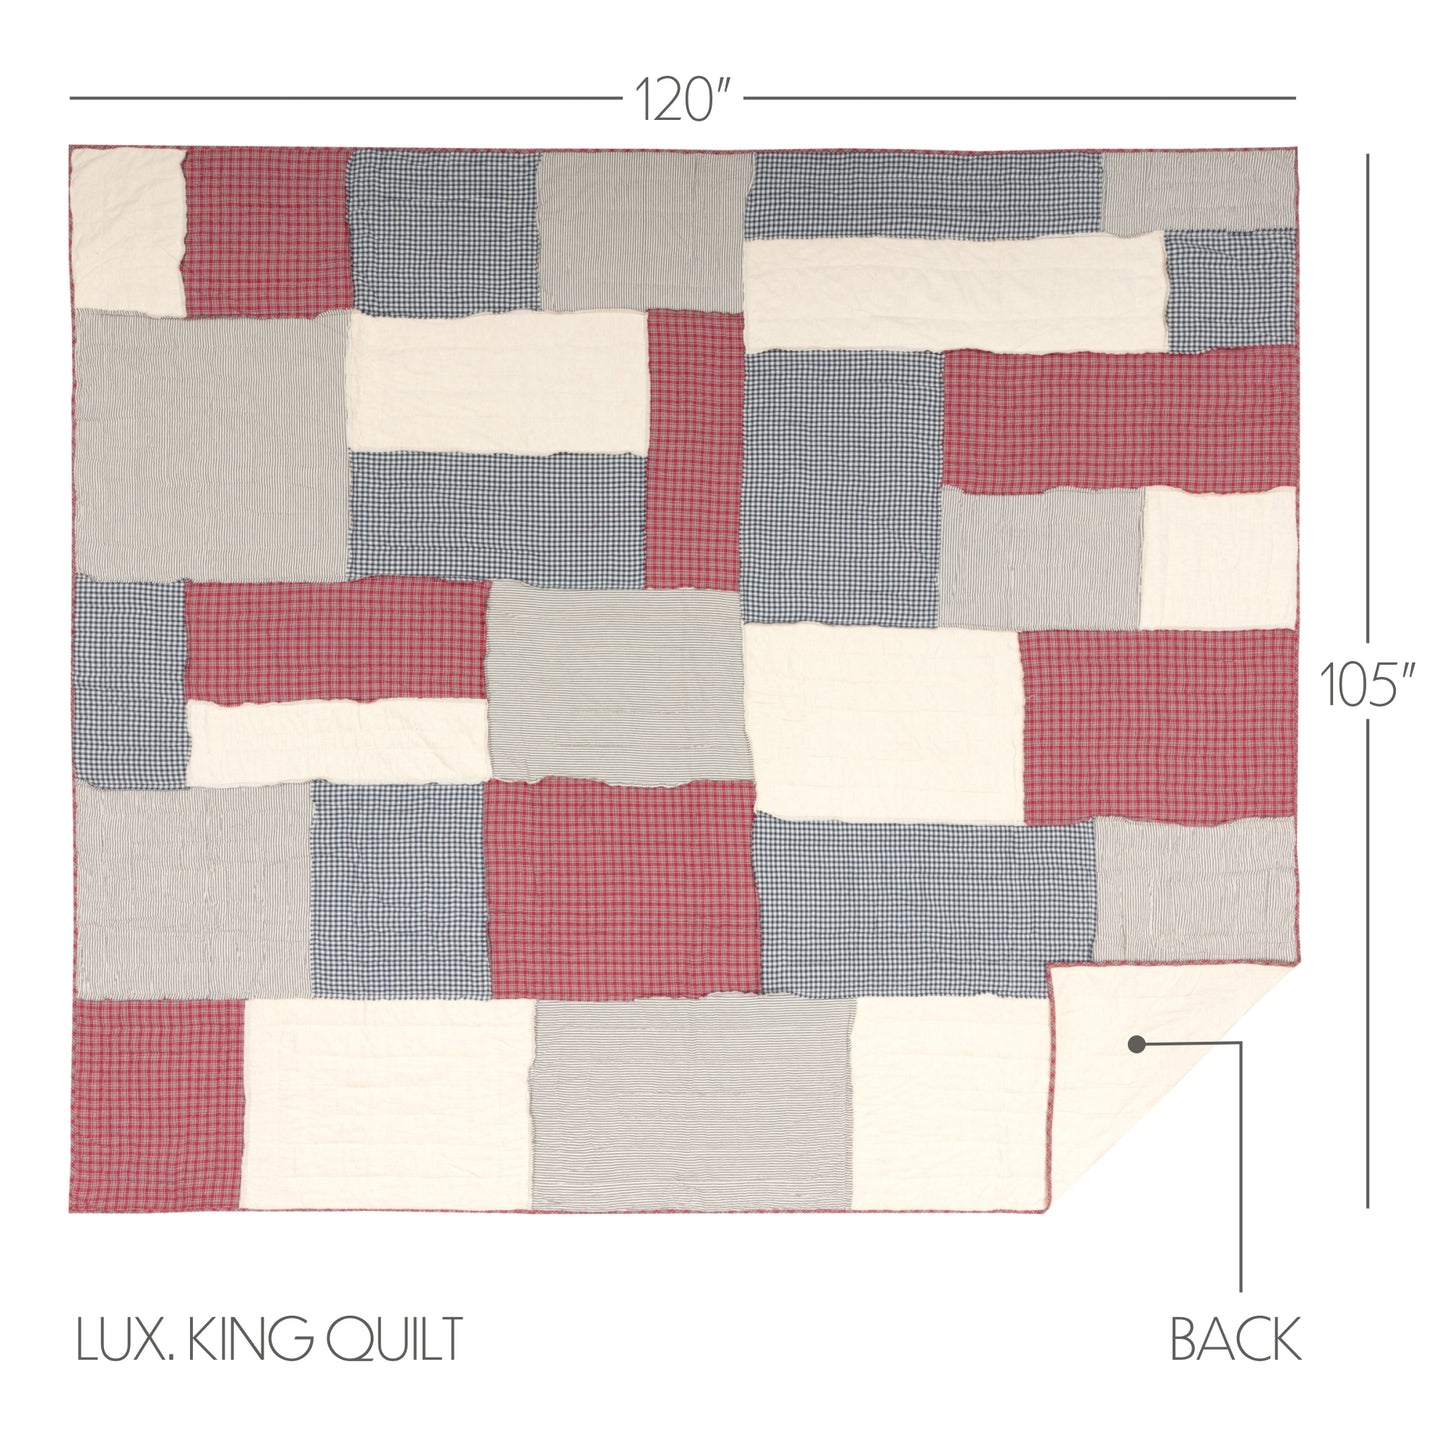 51853-Hatteras-Patch-Luxury-King-Quilt-120Wx105L-image-3